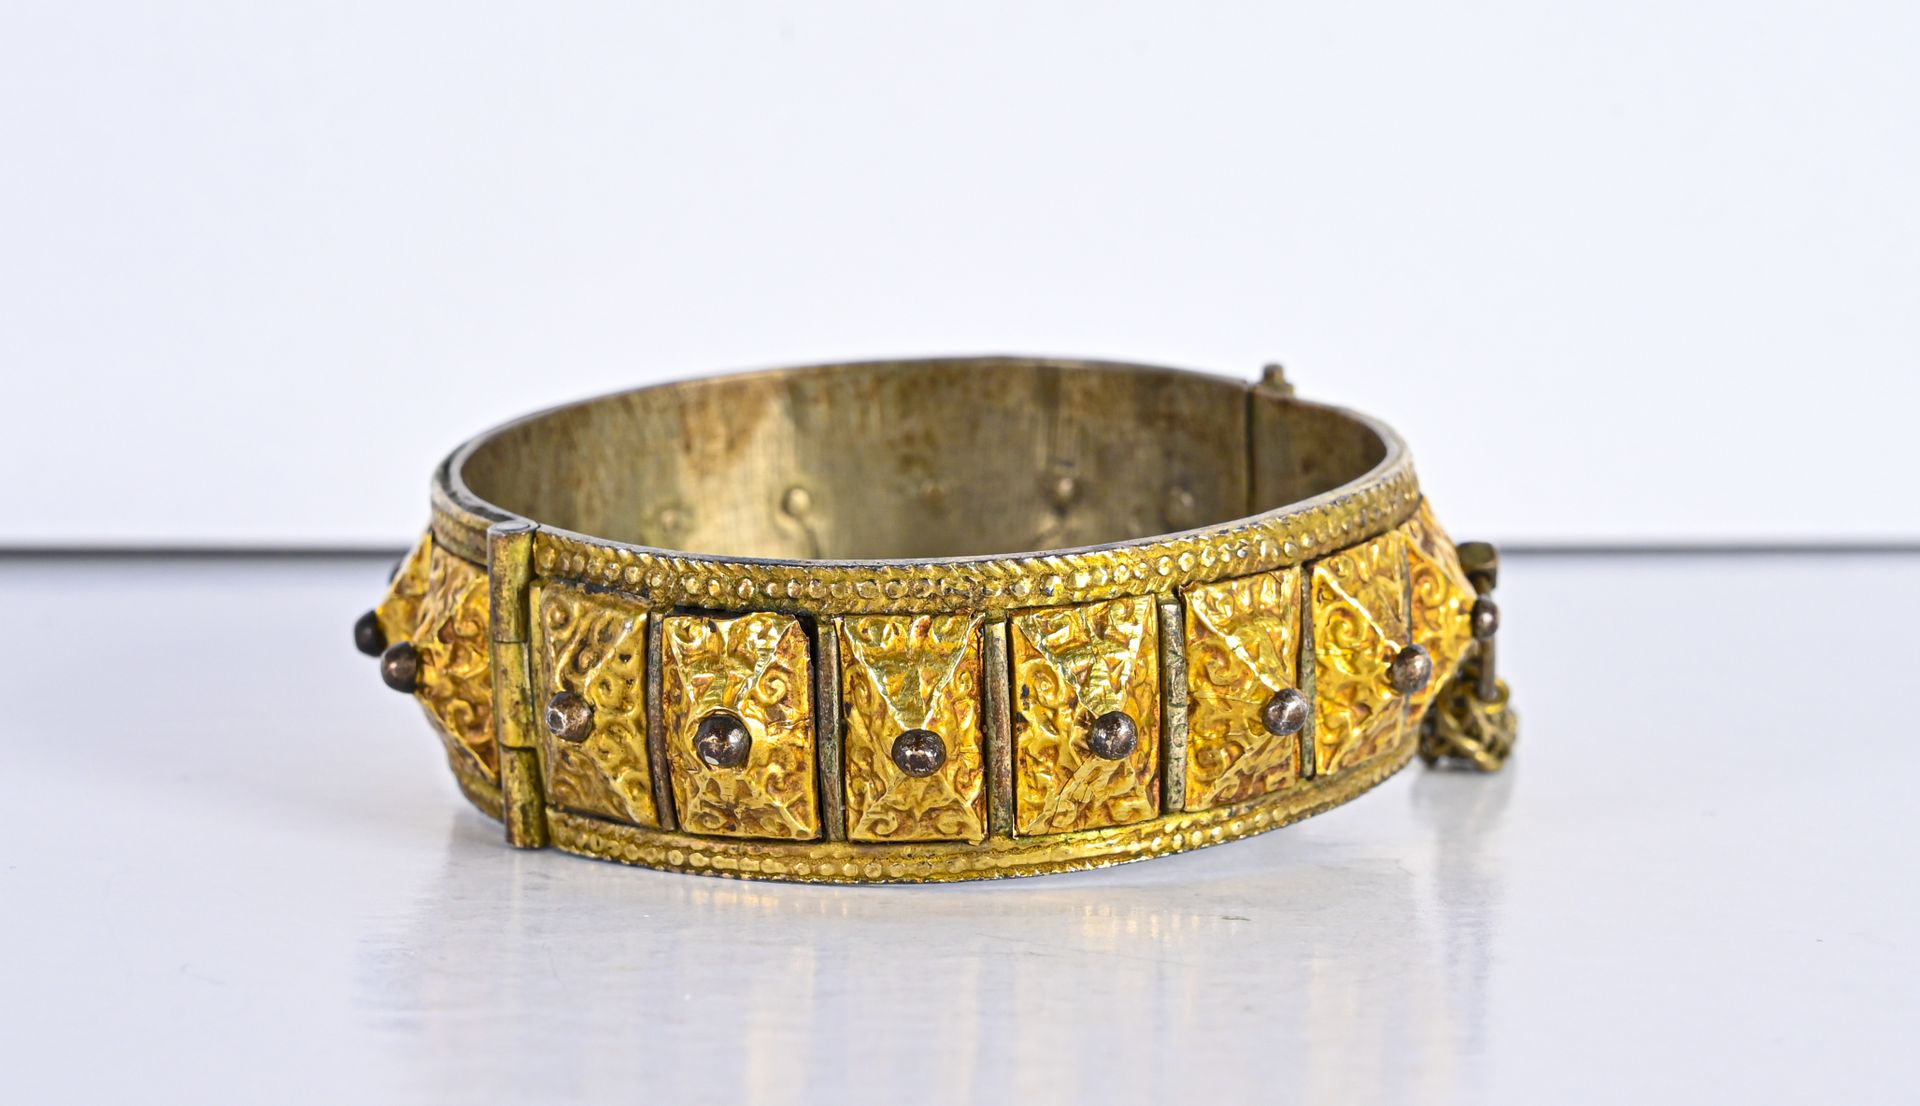 Bracelet en or et argent 
with pyramidal decoration, decorated with two chains a&hellip;